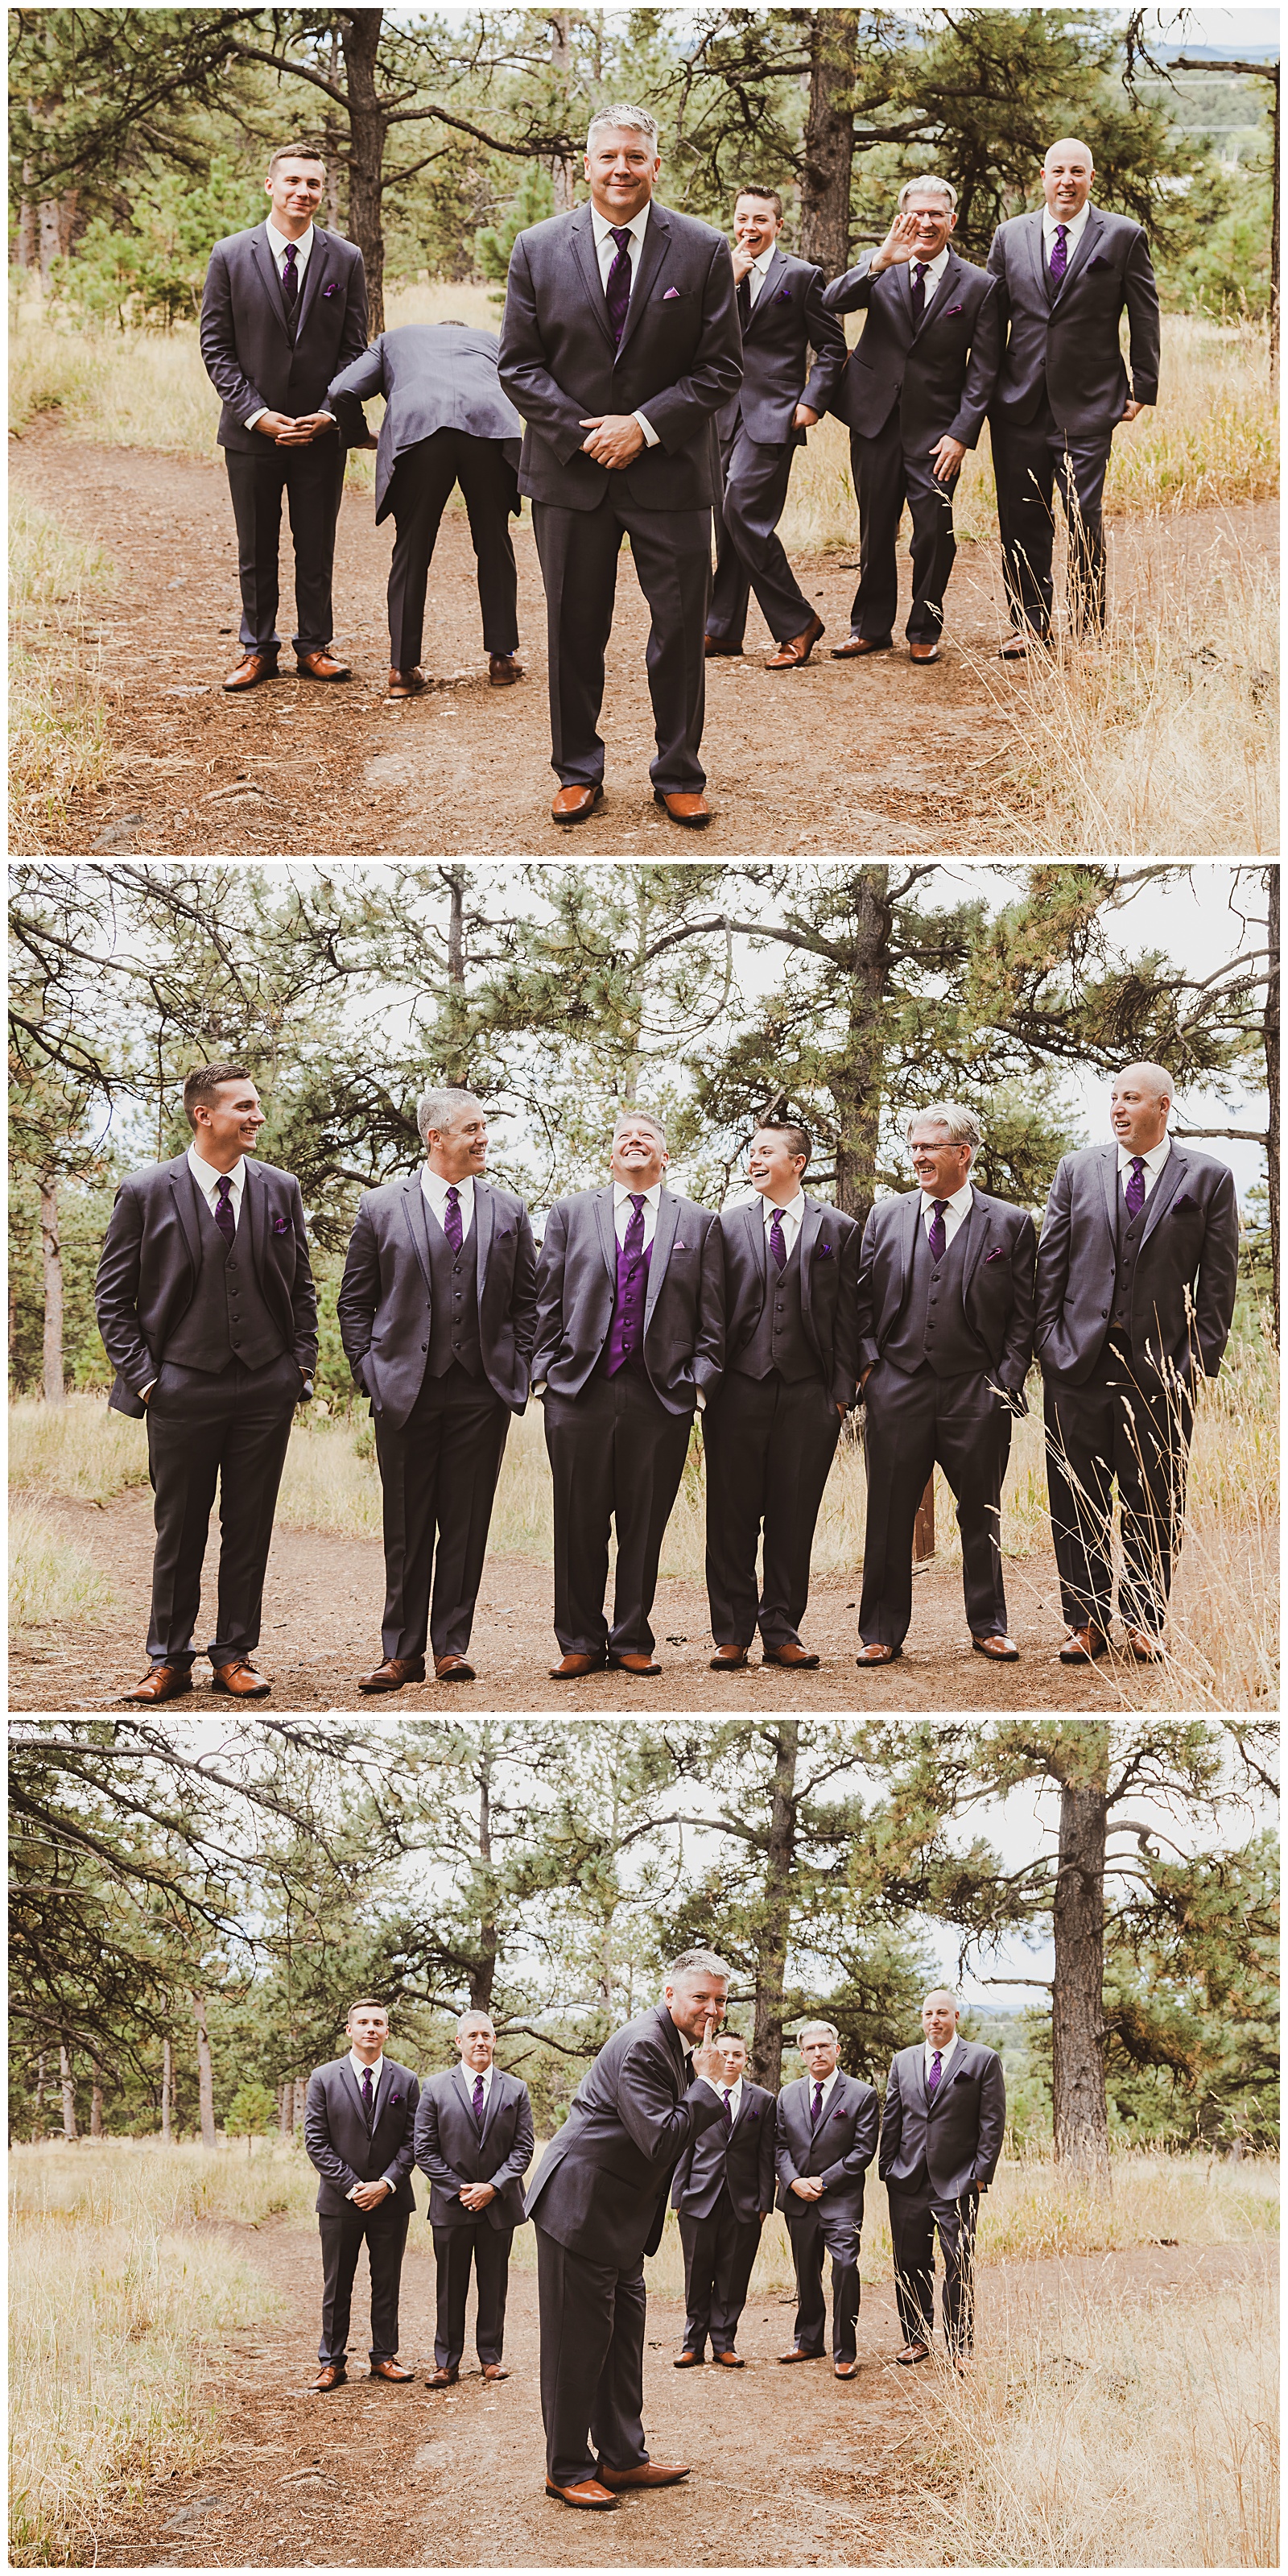 fun pictures of groom and groomsmen